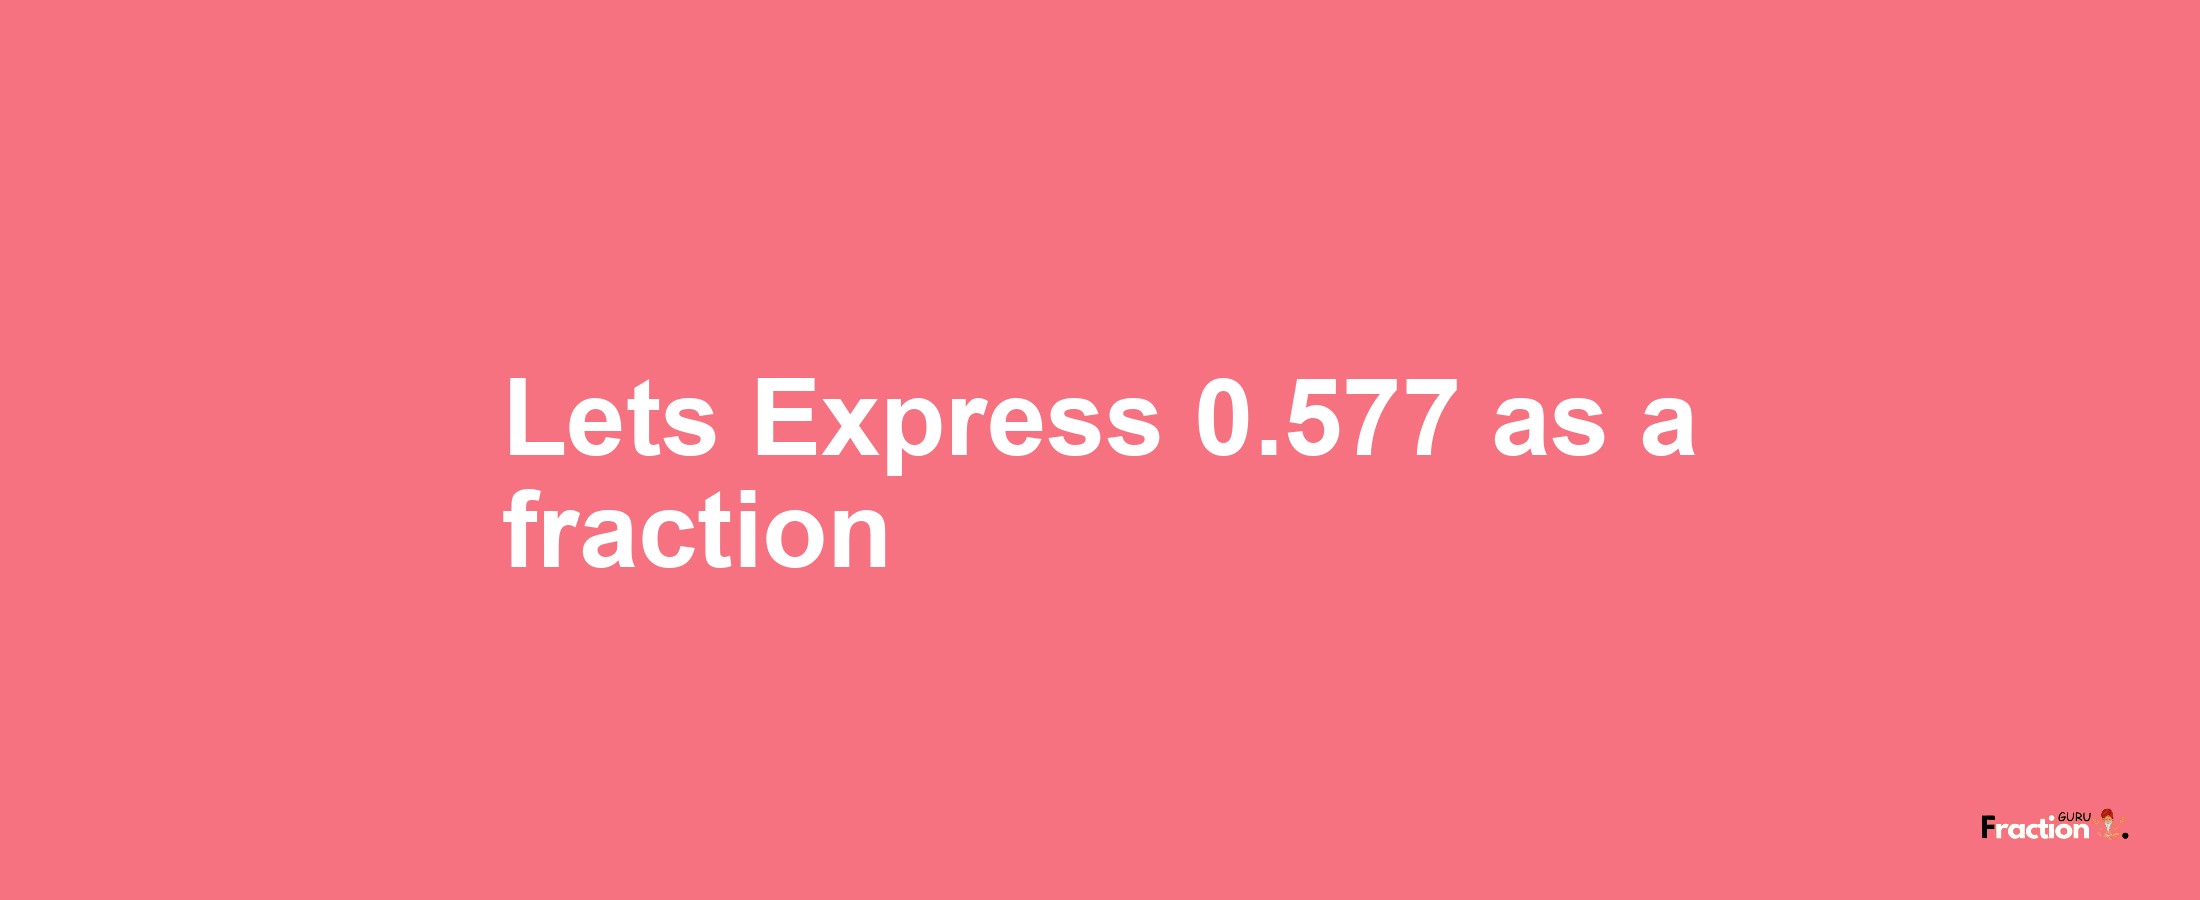 Lets Express 0.577 as afraction